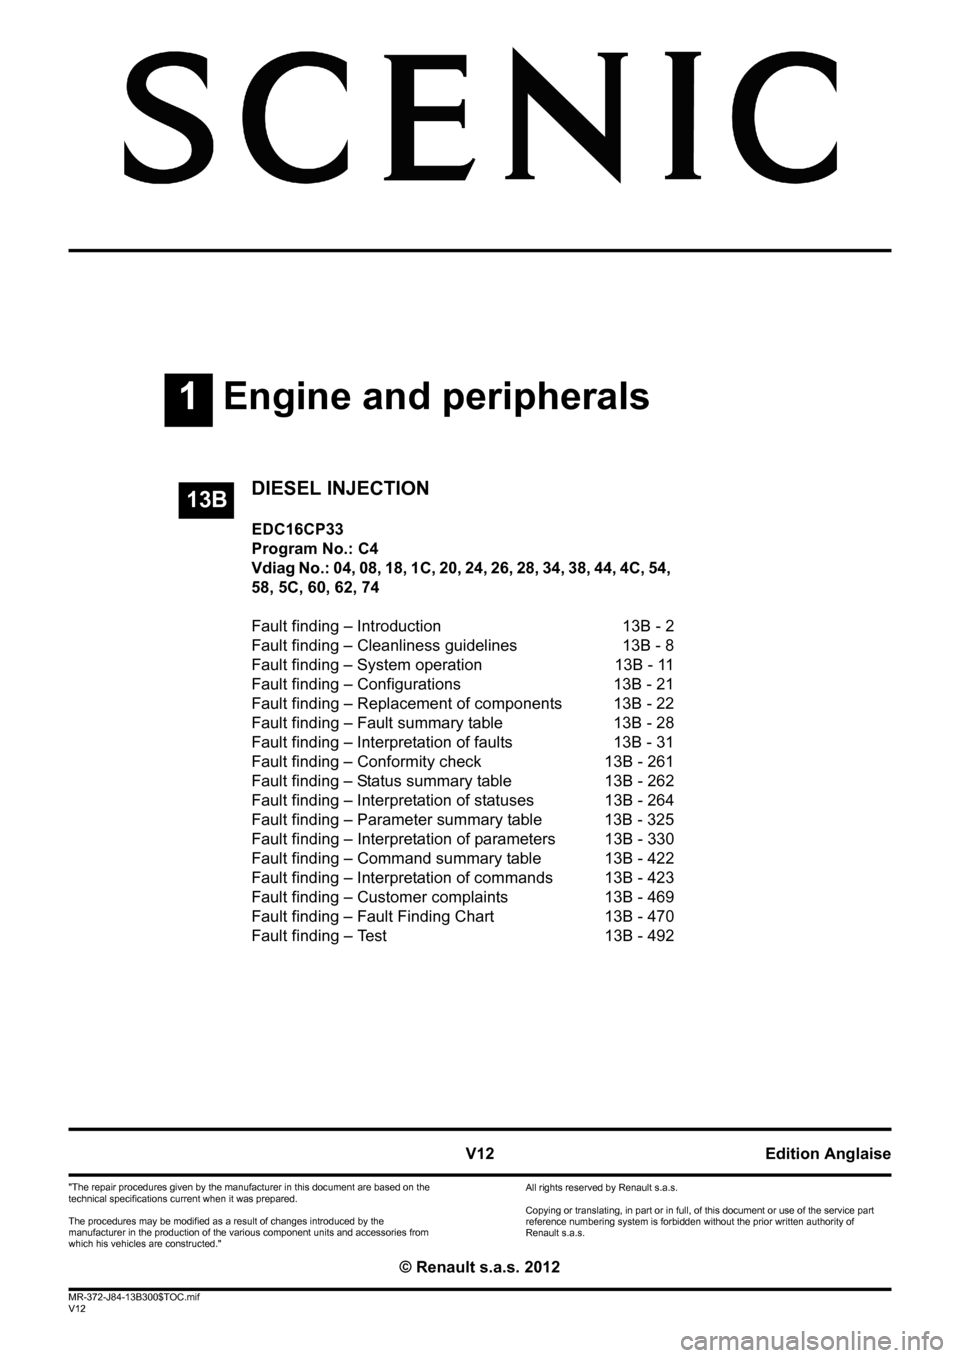 RENAULT SCENIC 2012 J95 / 3.G Engine And Peripherals EDC16CP33 Workshop Manual 1Engine and peripherals
V12 MR-372-J84-13B300$TOC.mif
V12
13B
"The repair procedures given by the manufacturer in this document are based on the 
technical specifications current when it was prepared.